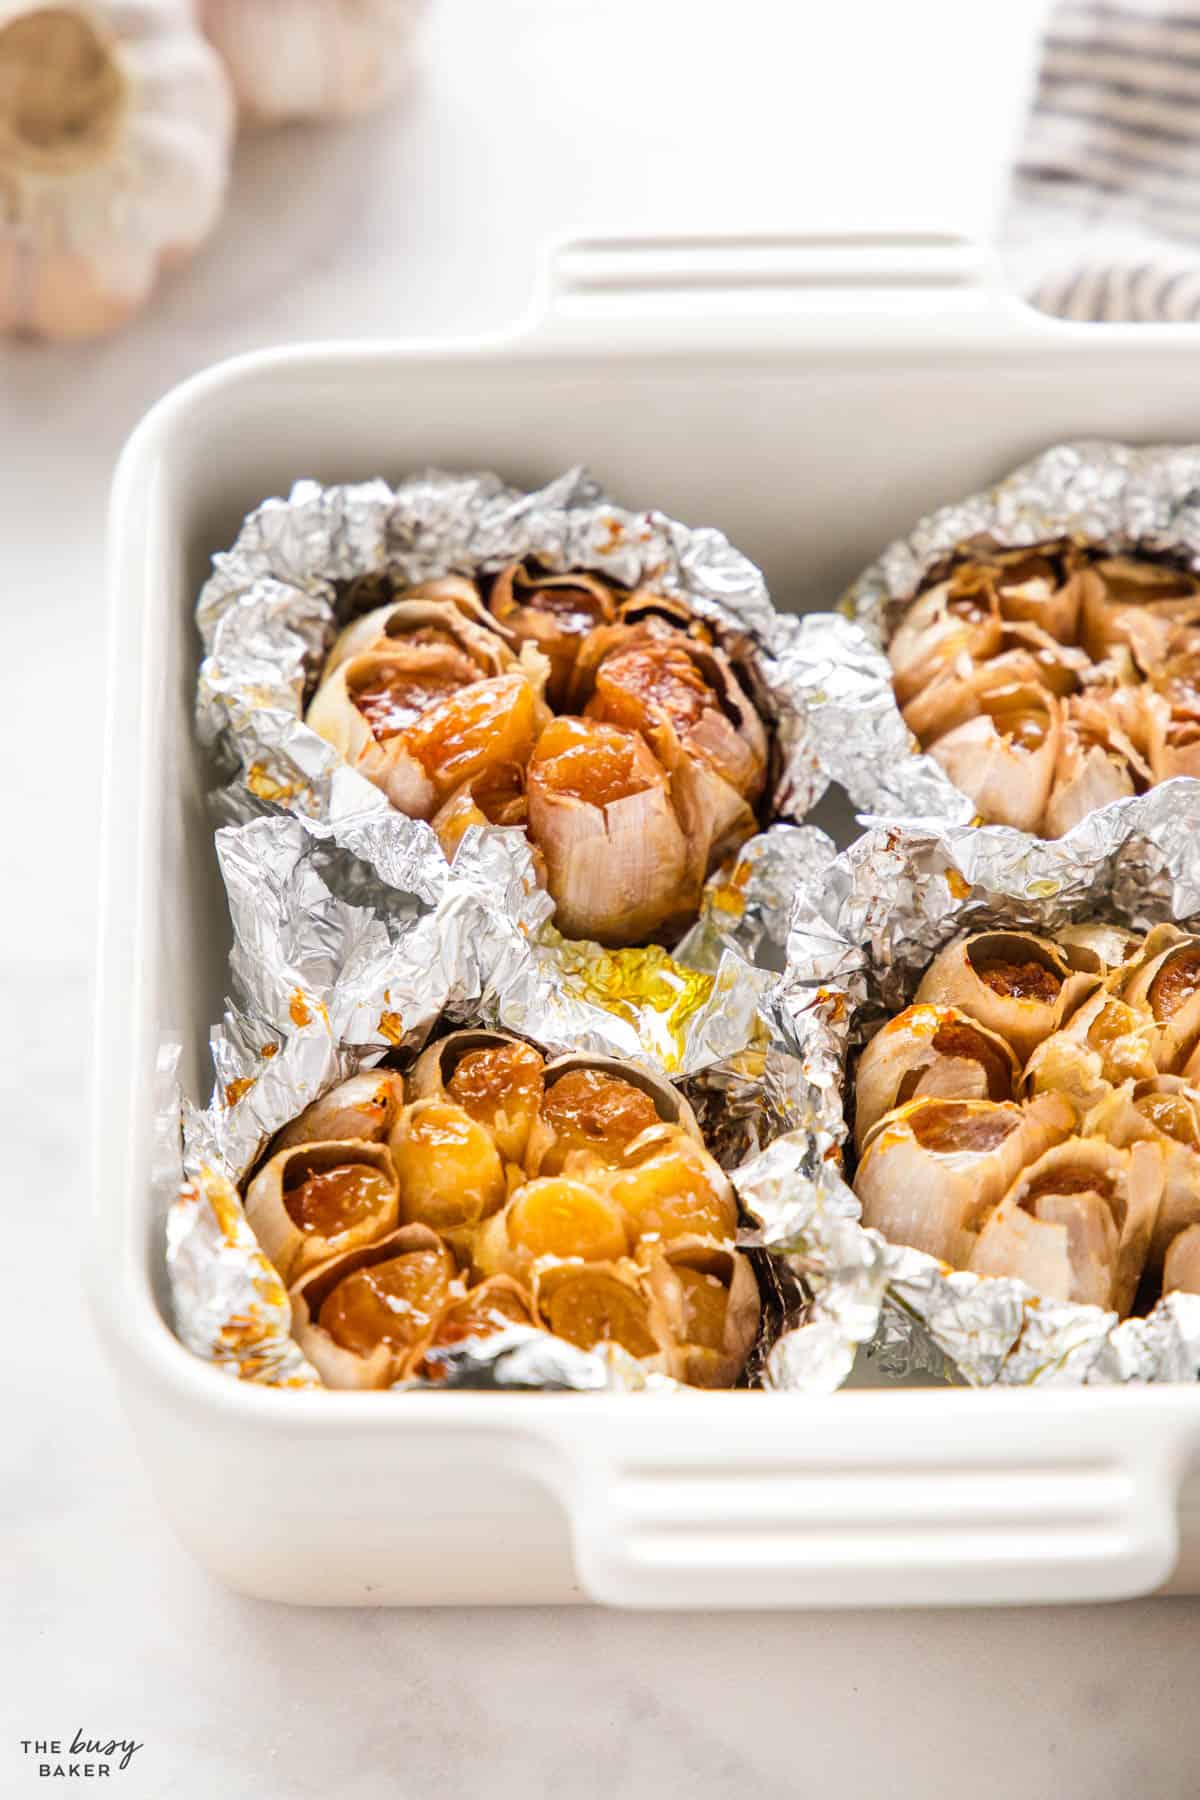 oven roasted garlic in a baking dish with aluminum foil